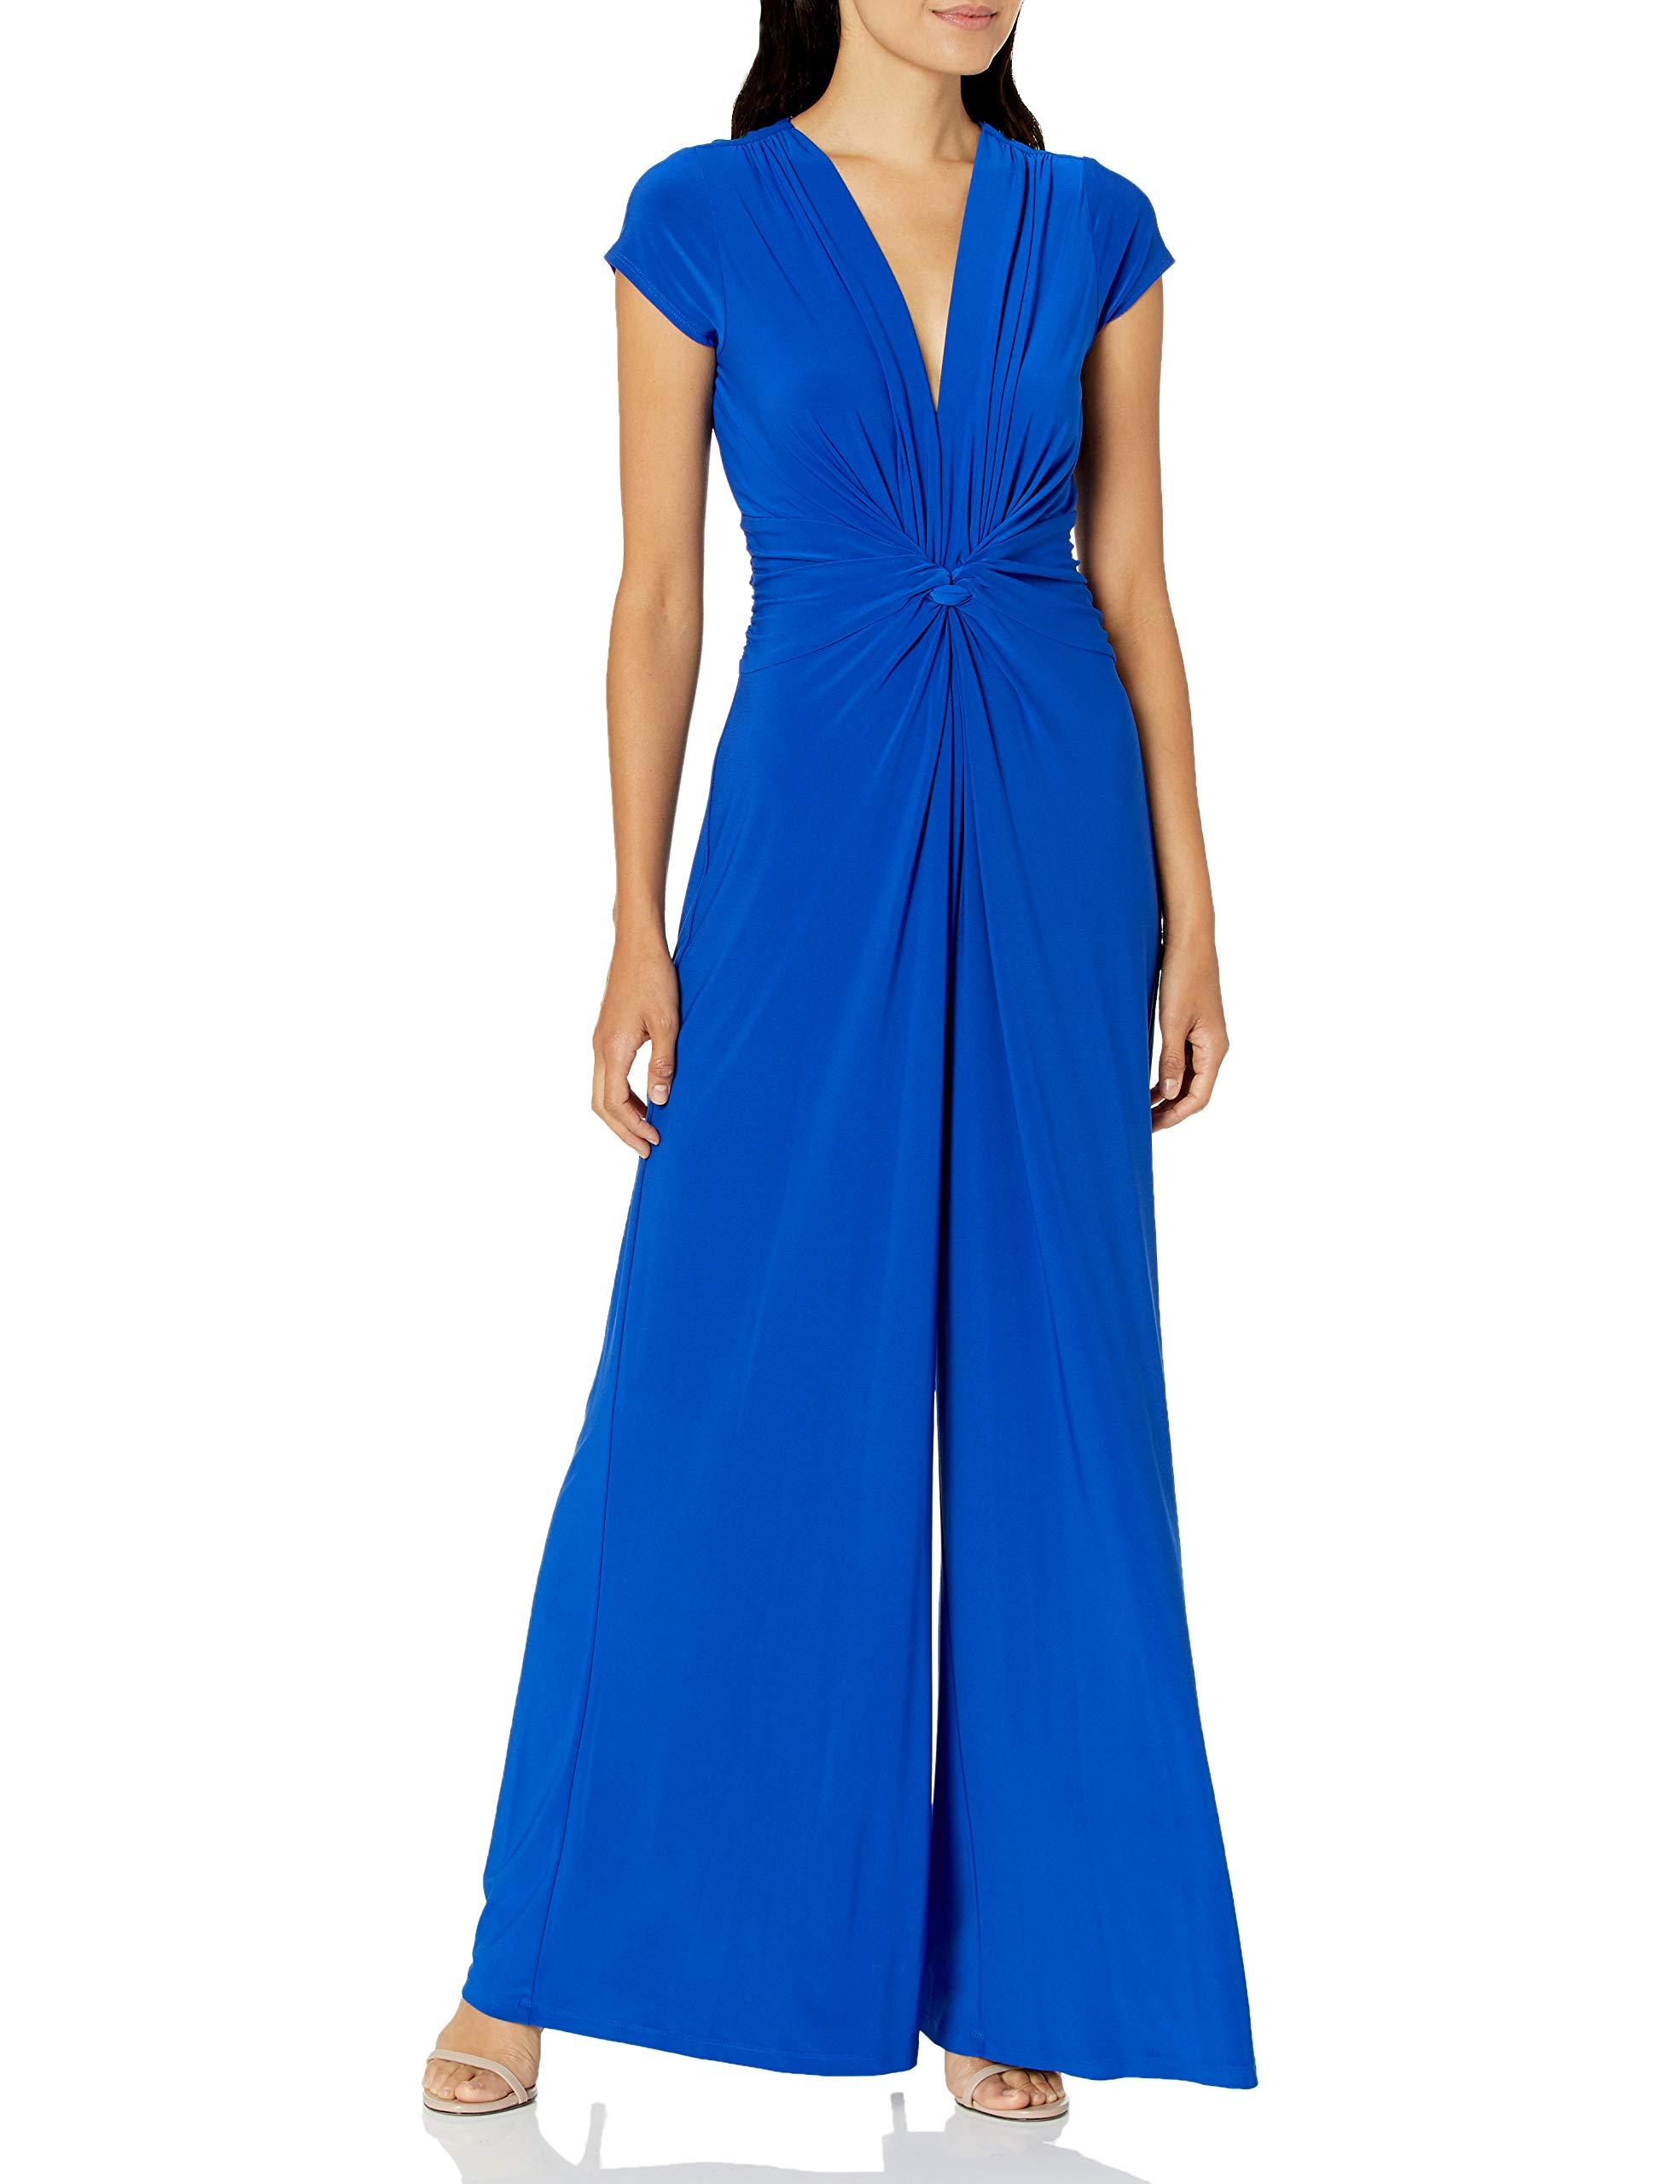 Vince Camuto Twist Front Jumpsuit in Blue - Lyst